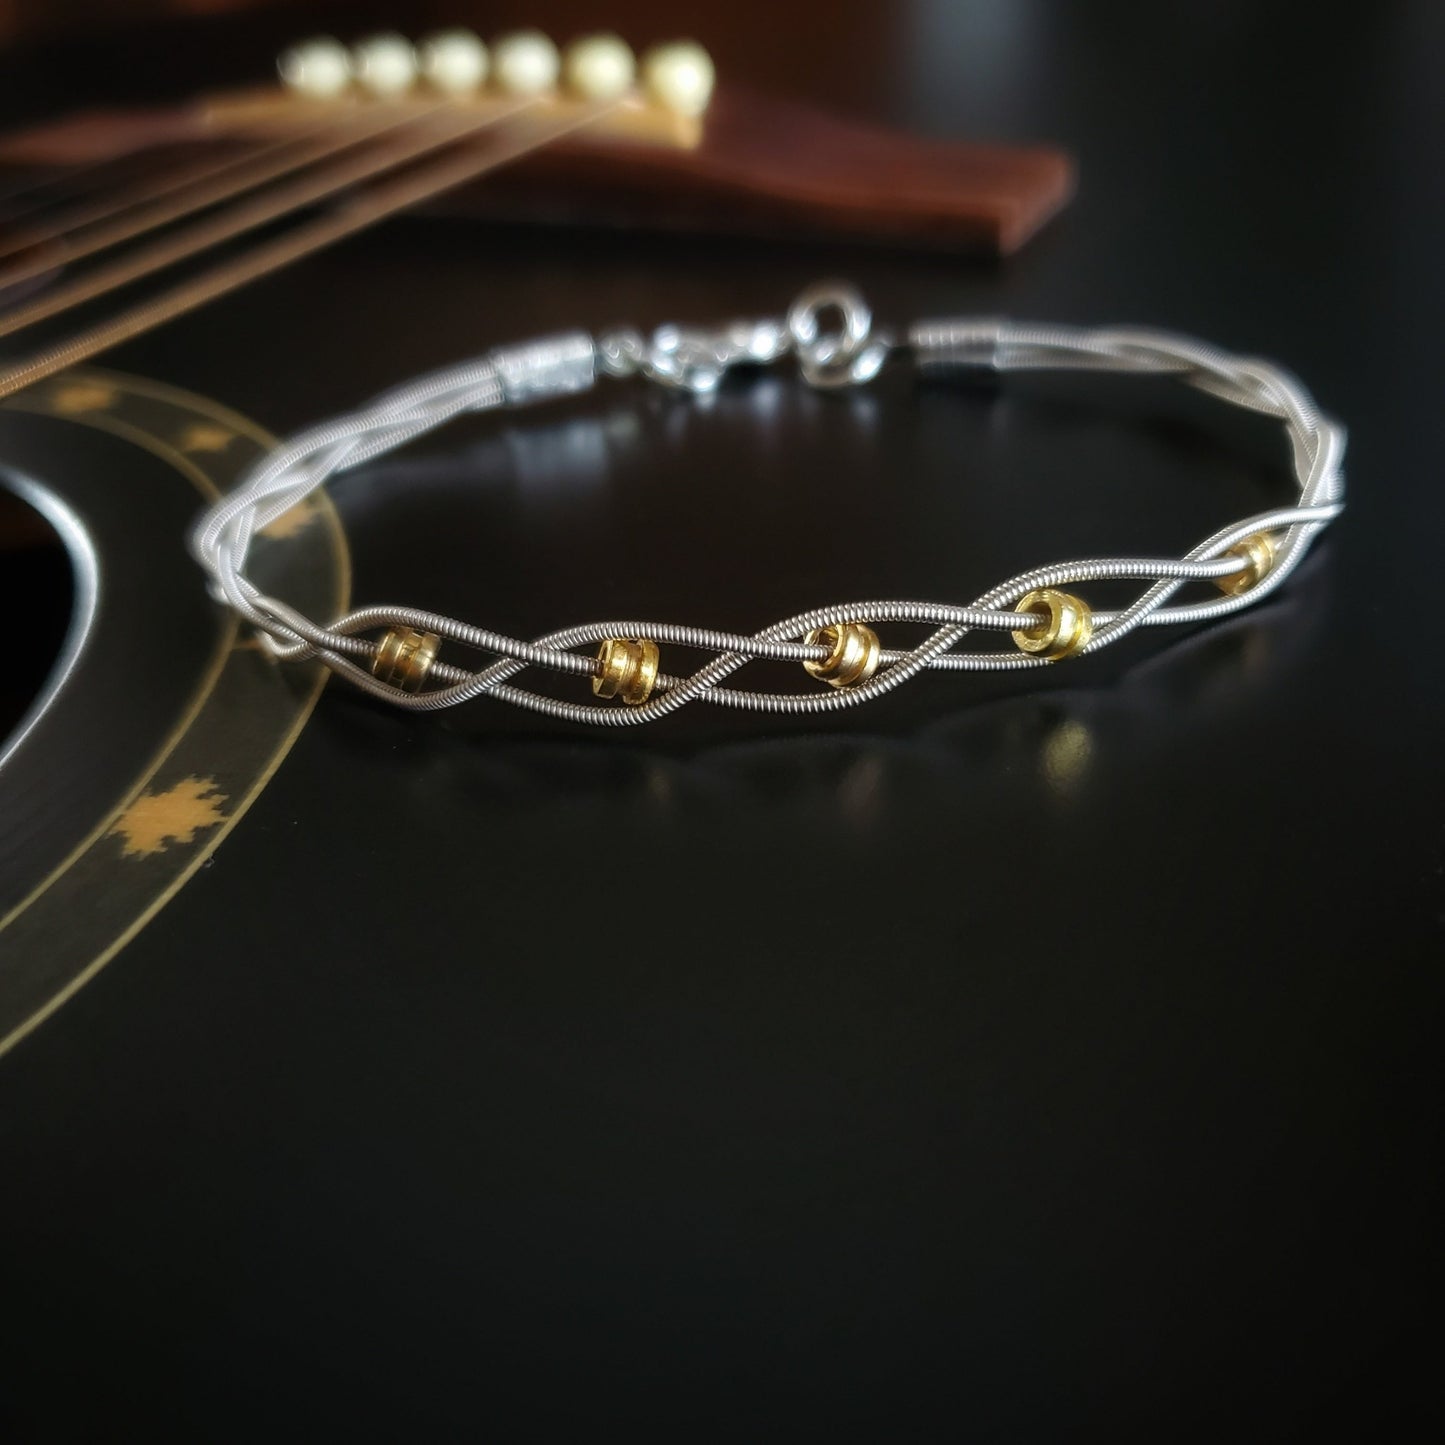 Braided Silver and Gold Guitar String and Ballend Unisex Bracelet